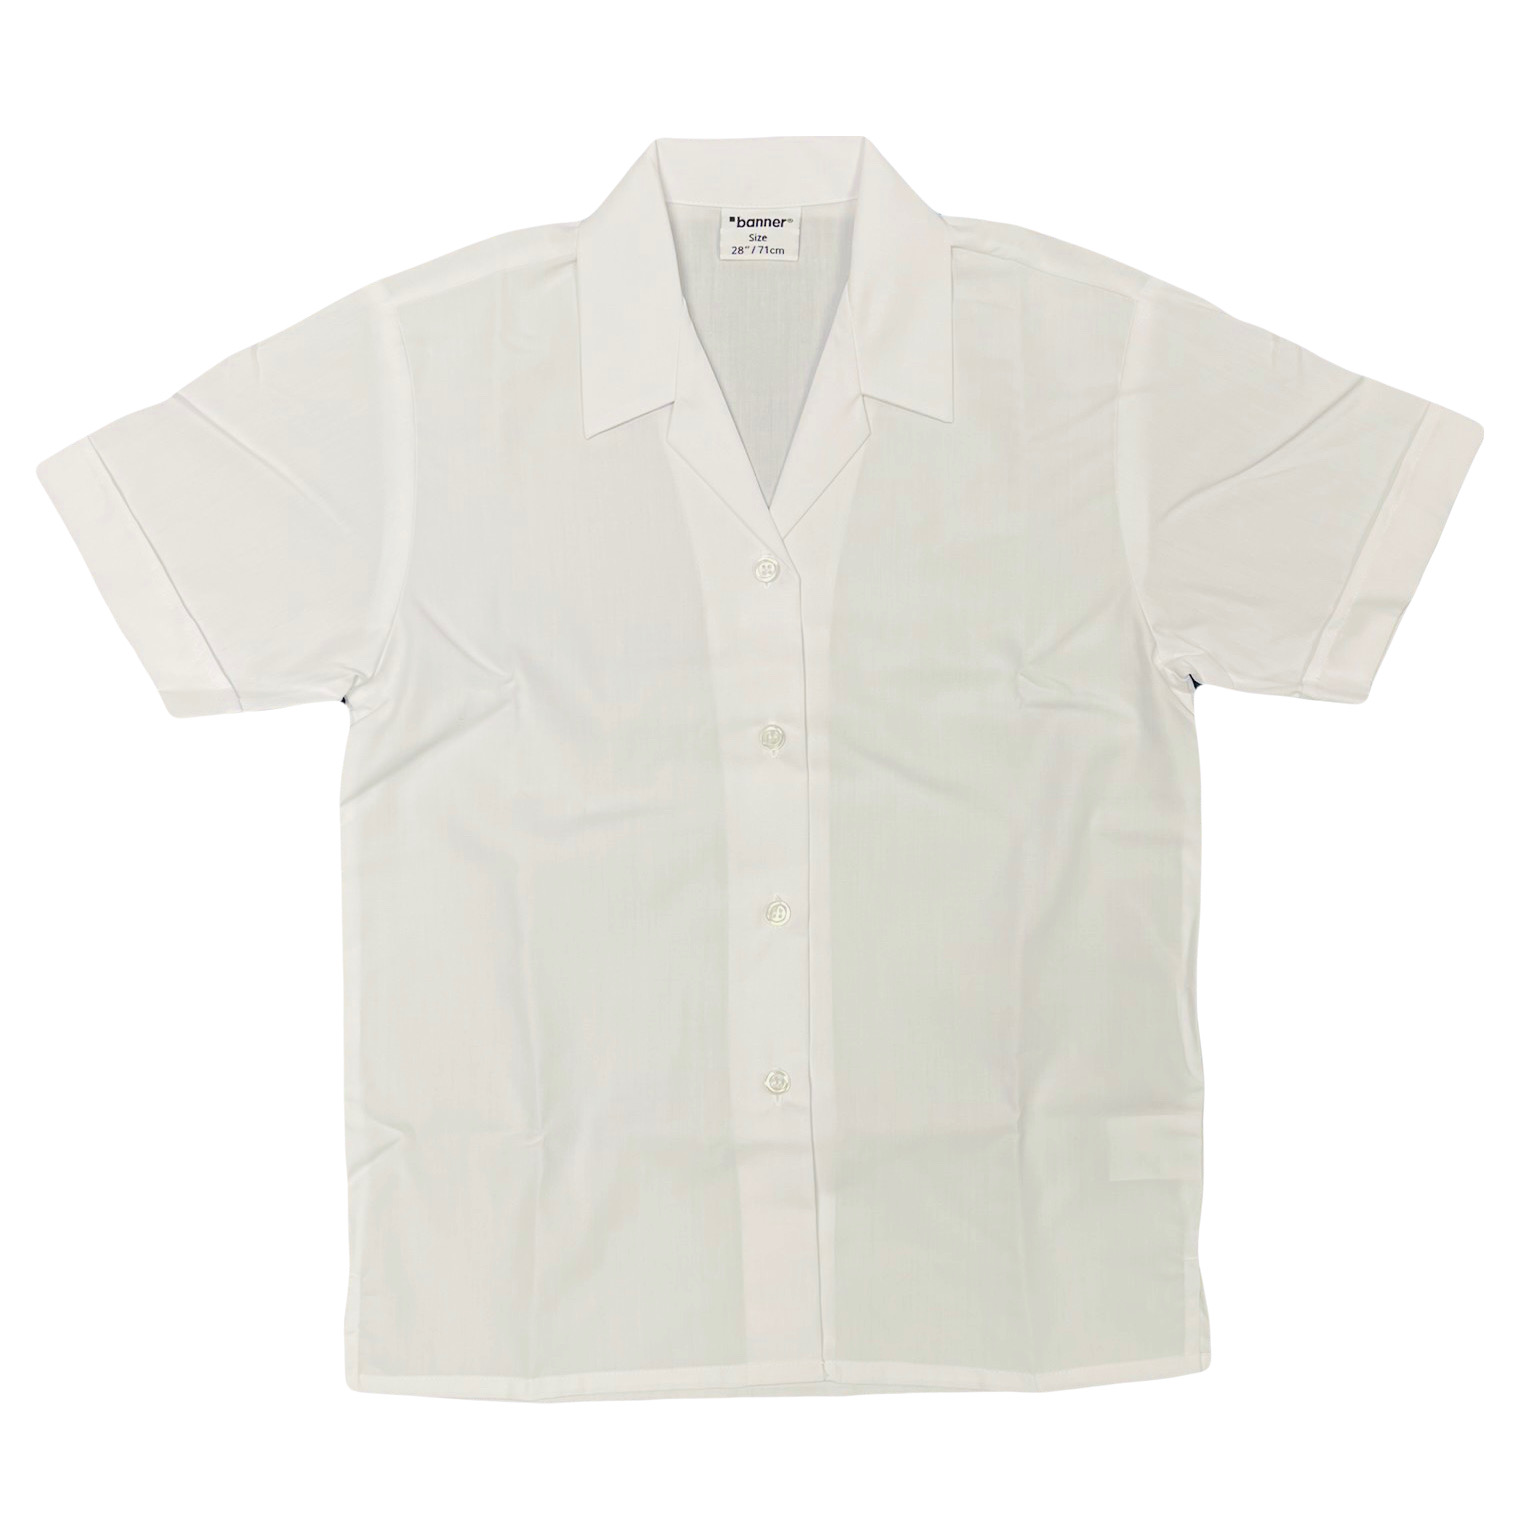 Chatham and Clarendon Revere Blouse short sleeve – 2 pack